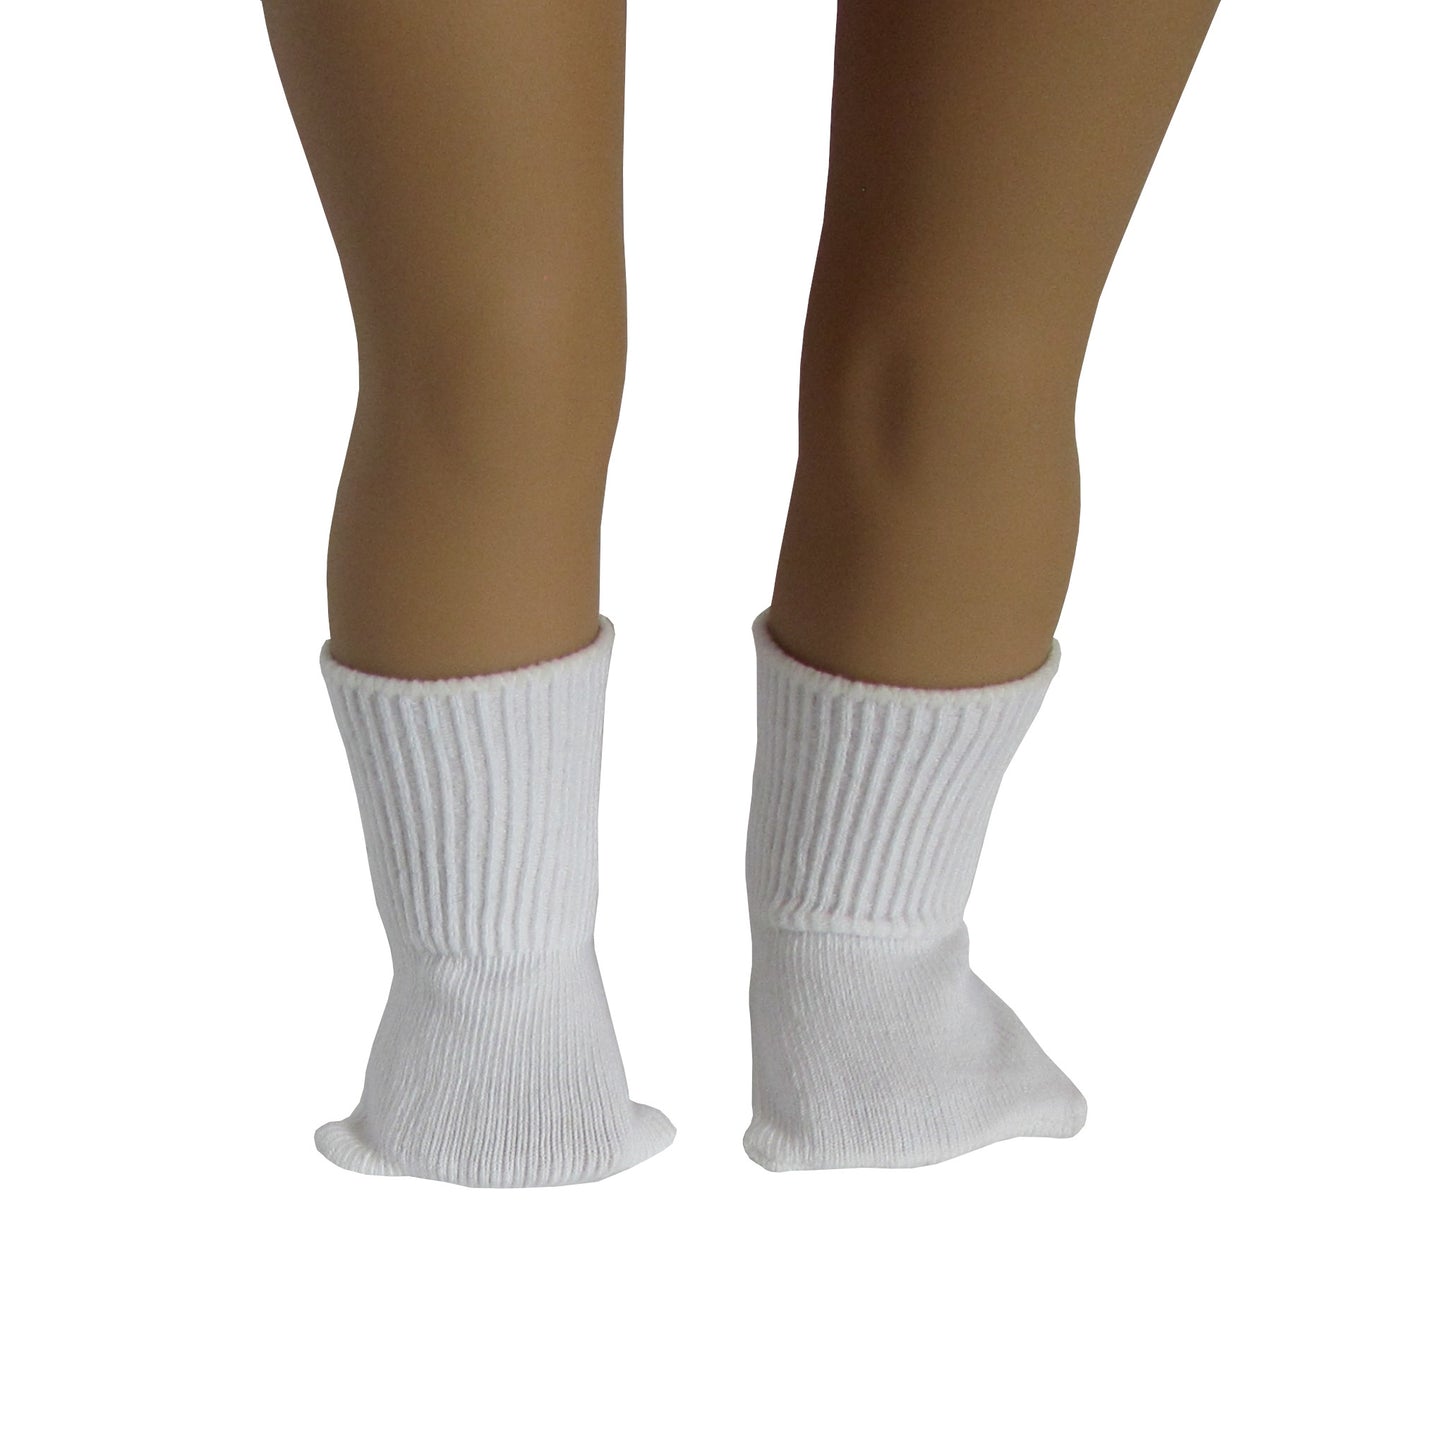 White Sport Socks for 18-inch dolls with Doll